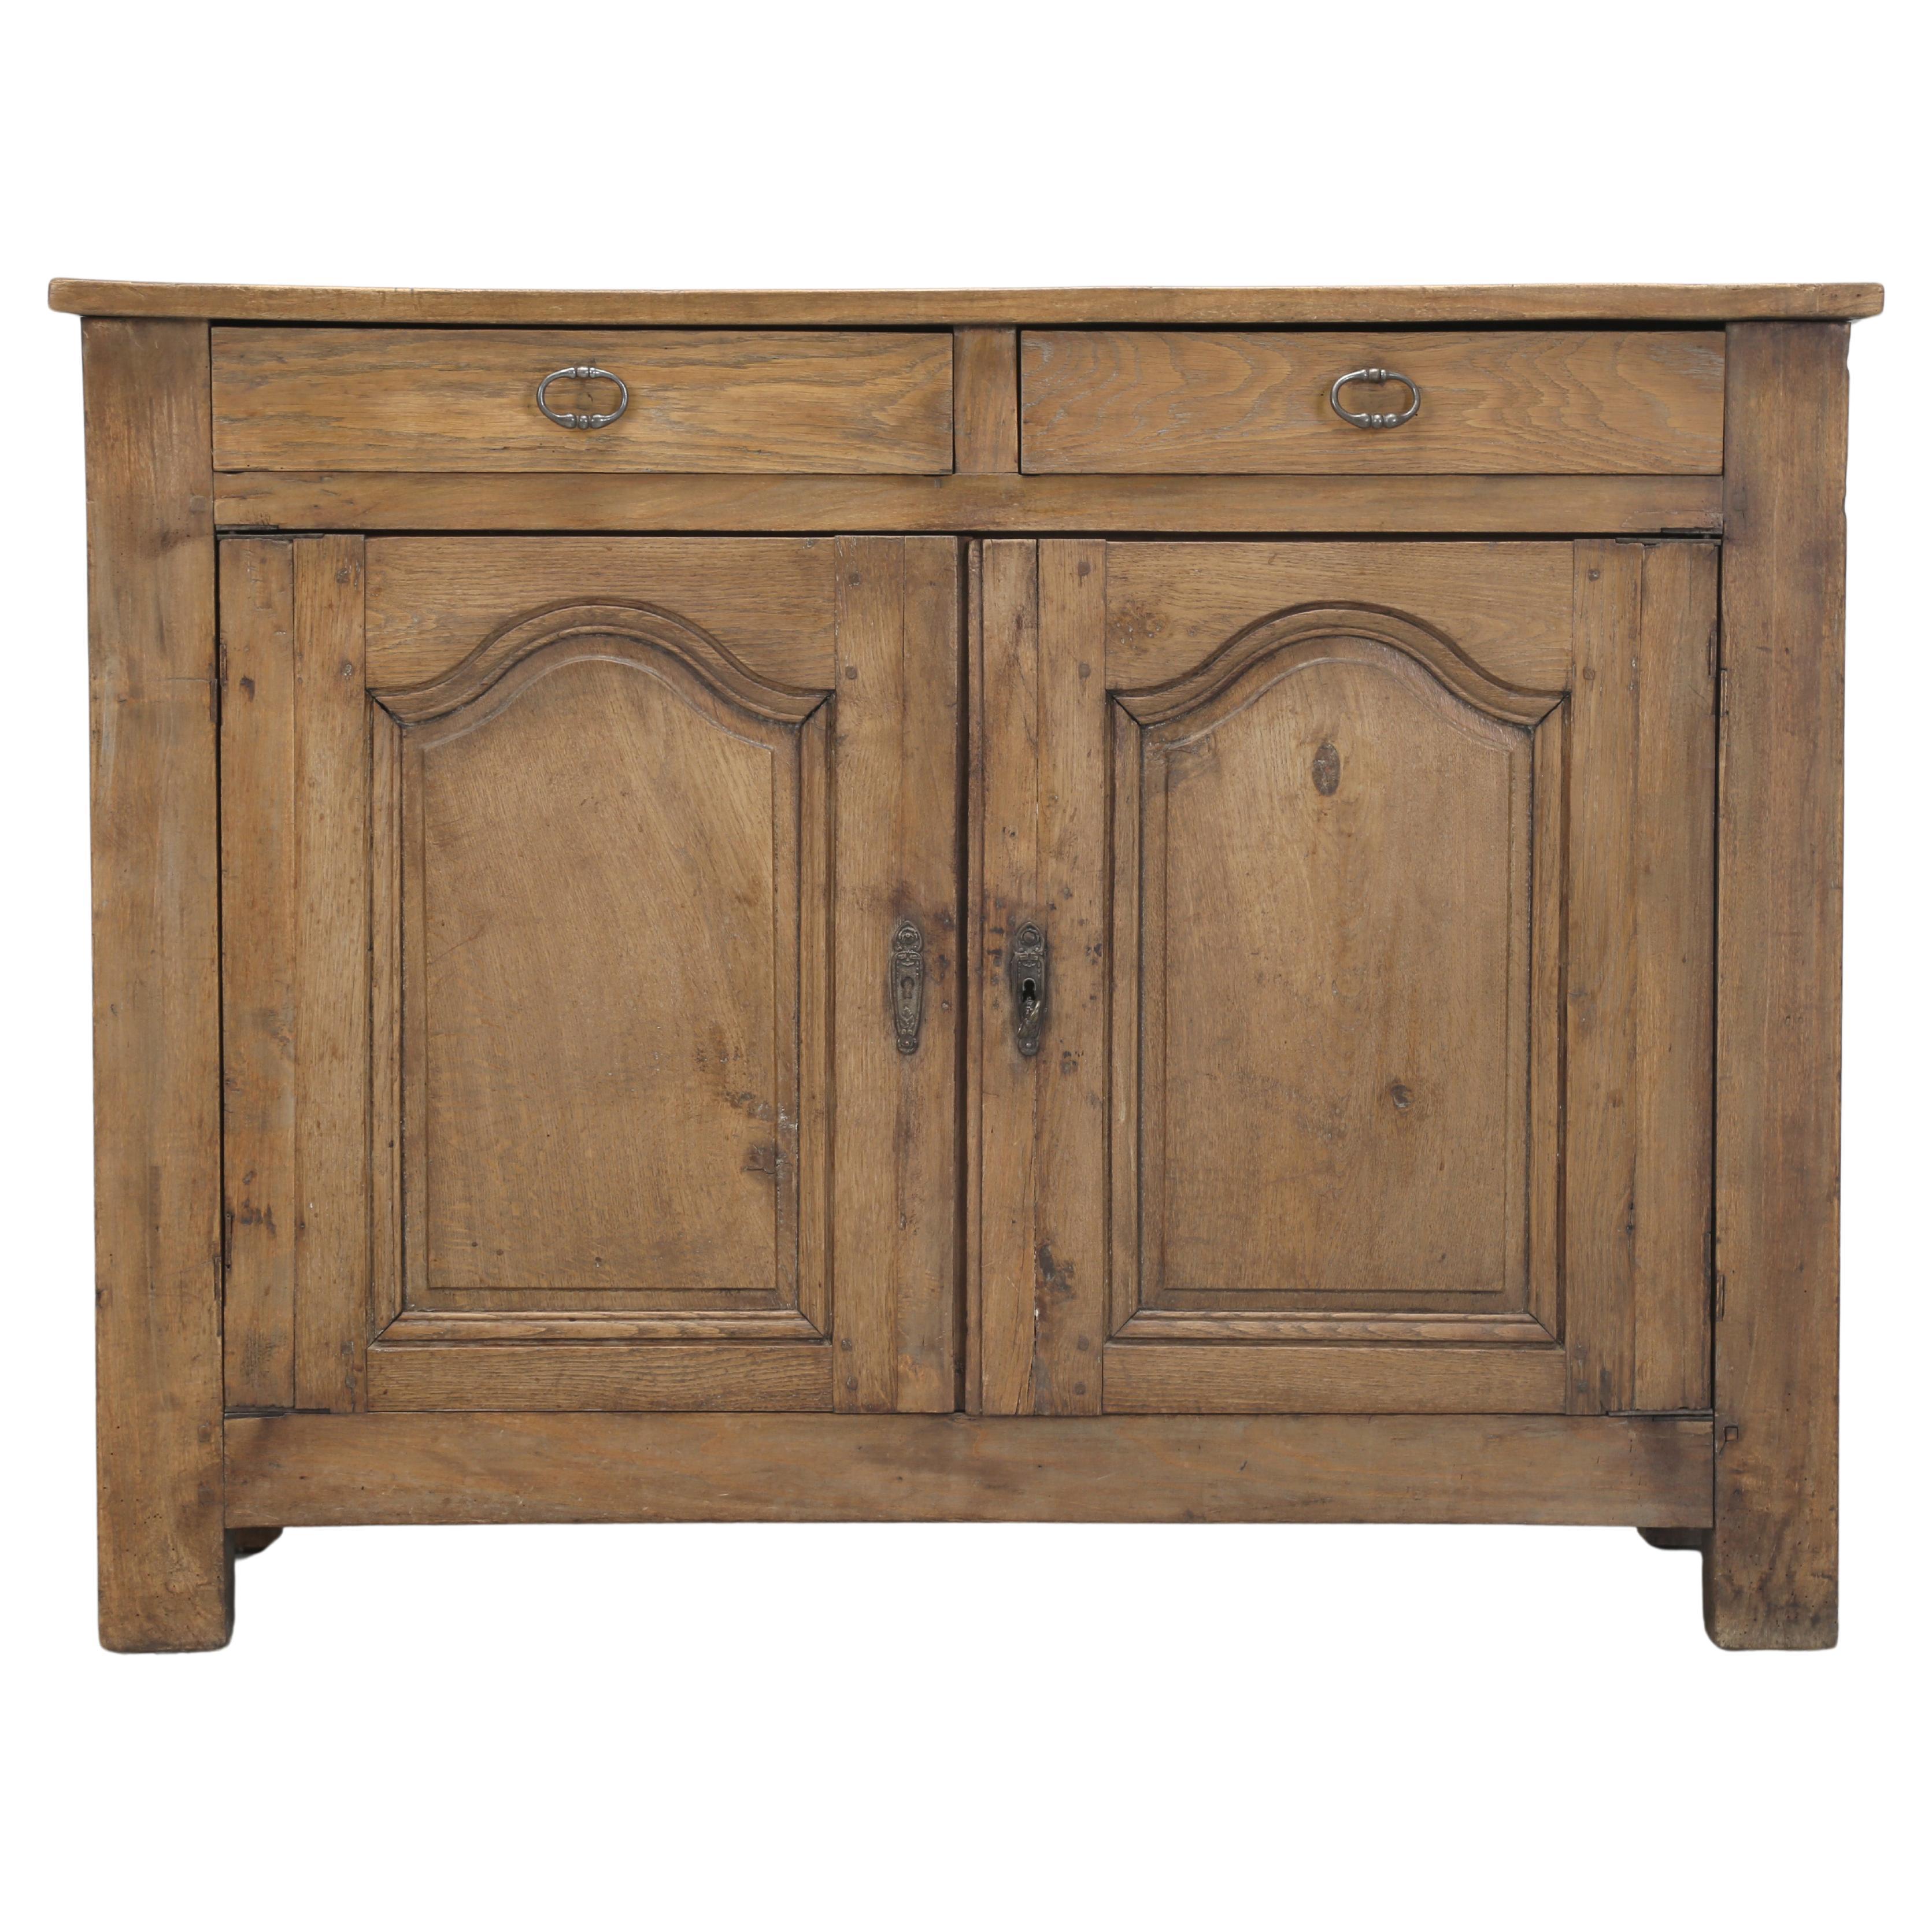 Antique French Louis XIII Style Buffet in Oak and Mixed Woods Older Restoration